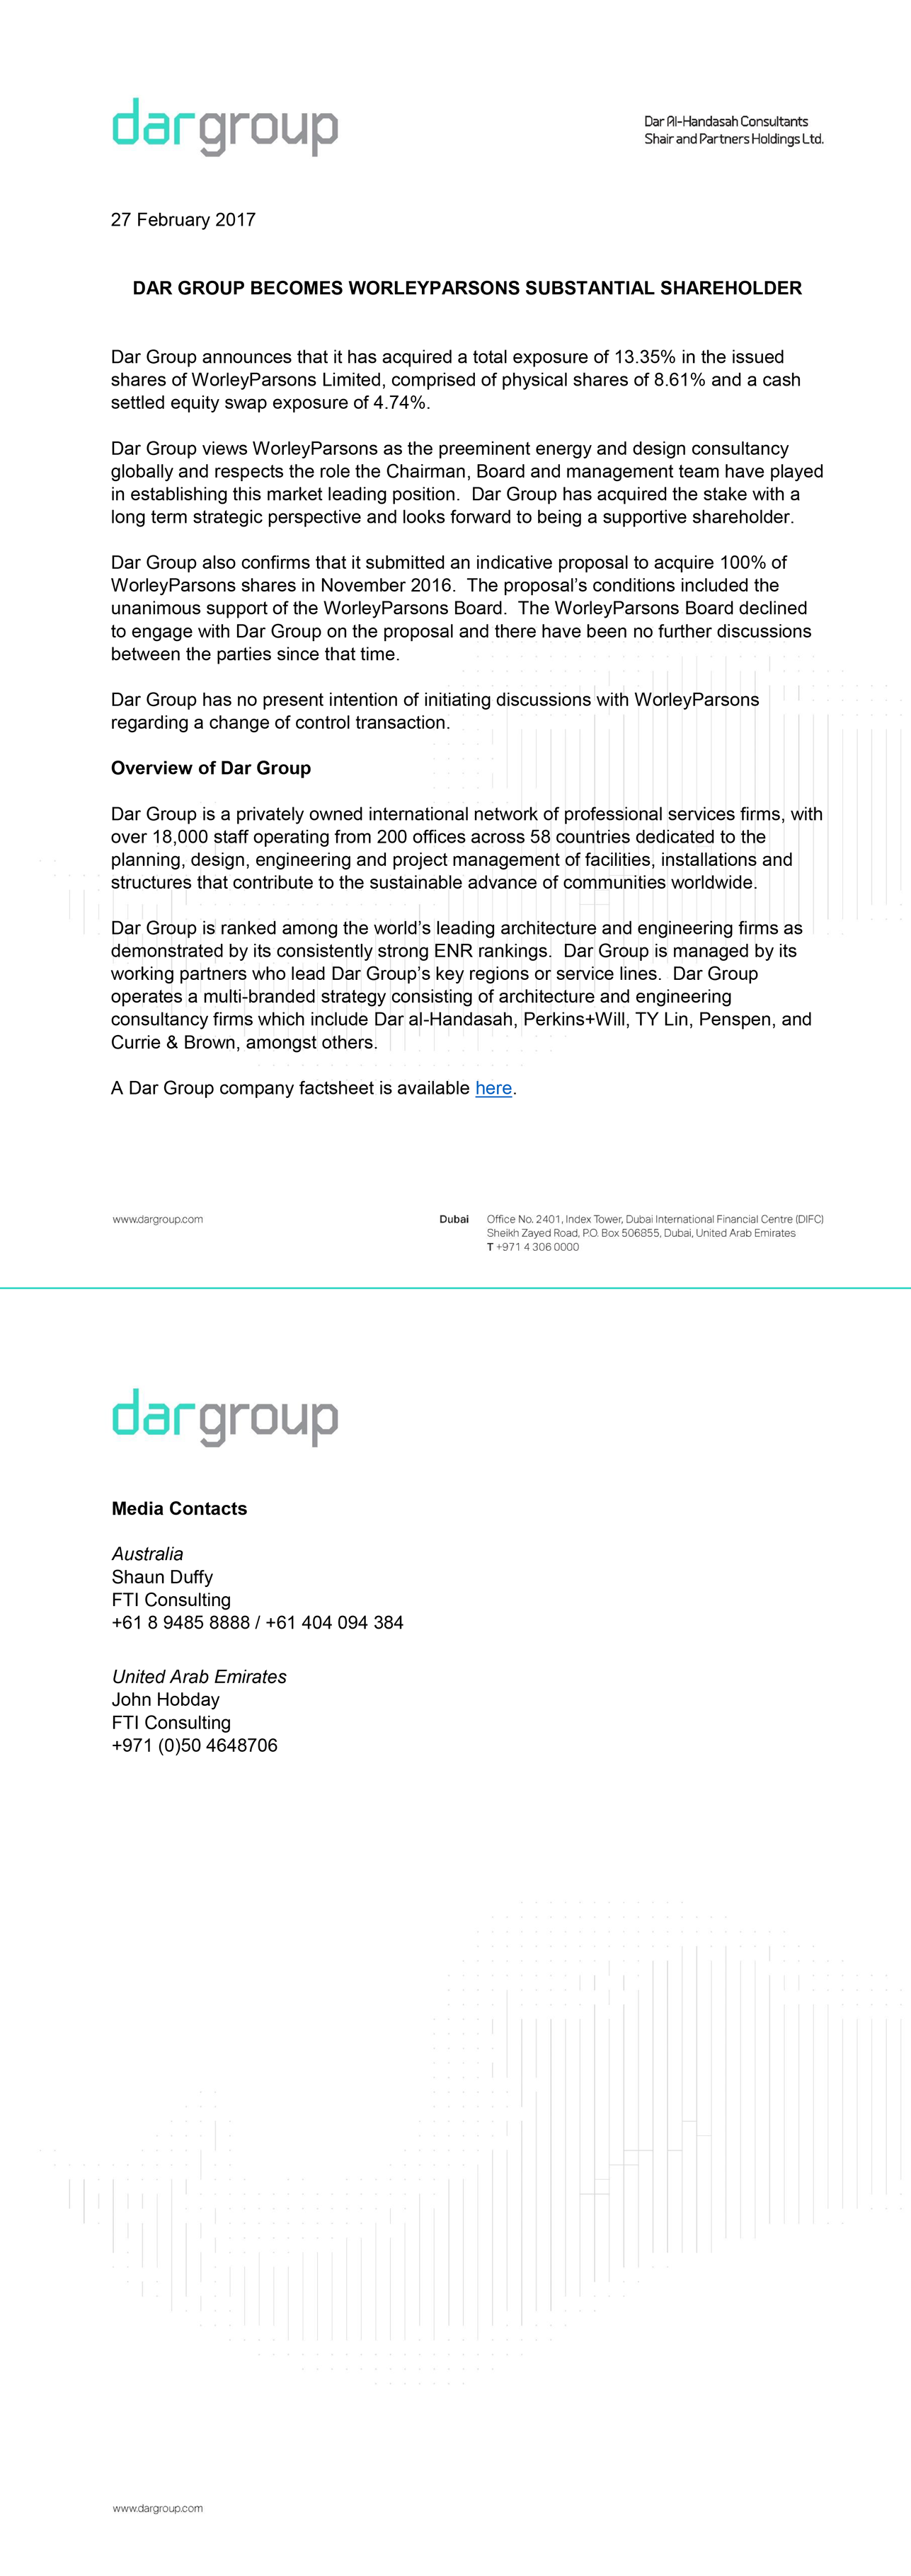 Dar Group becomes WorleyParsons substantial shareholder